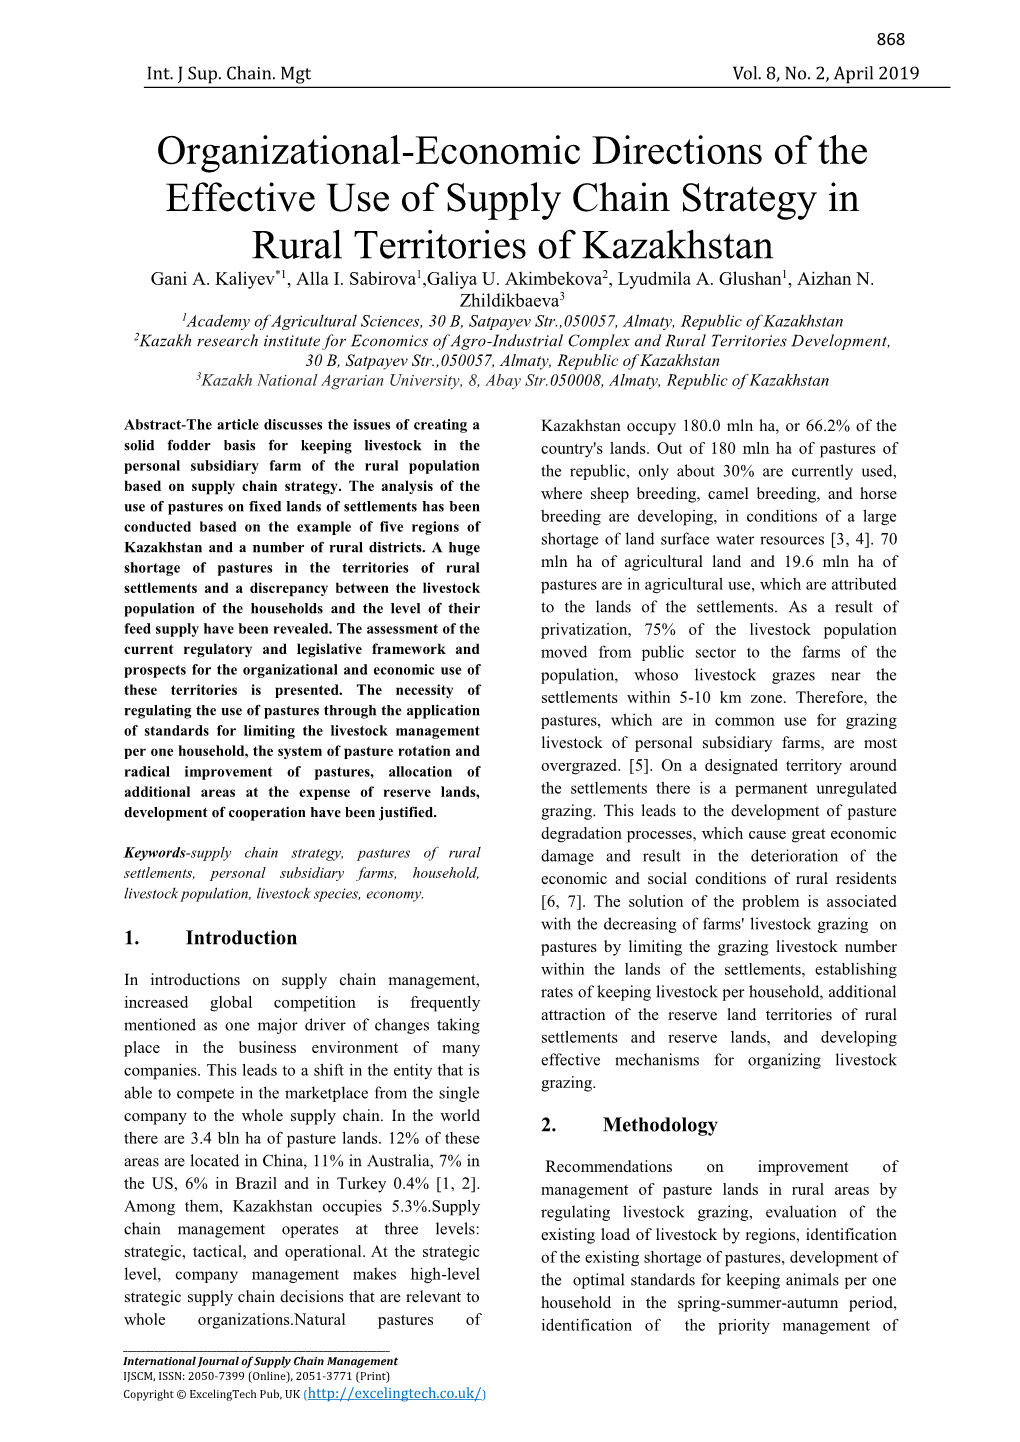 Organizational-Economic Directions of the Effective Use of Supply Chain Strategy in Rural Territories of Kazakhstan Gani A